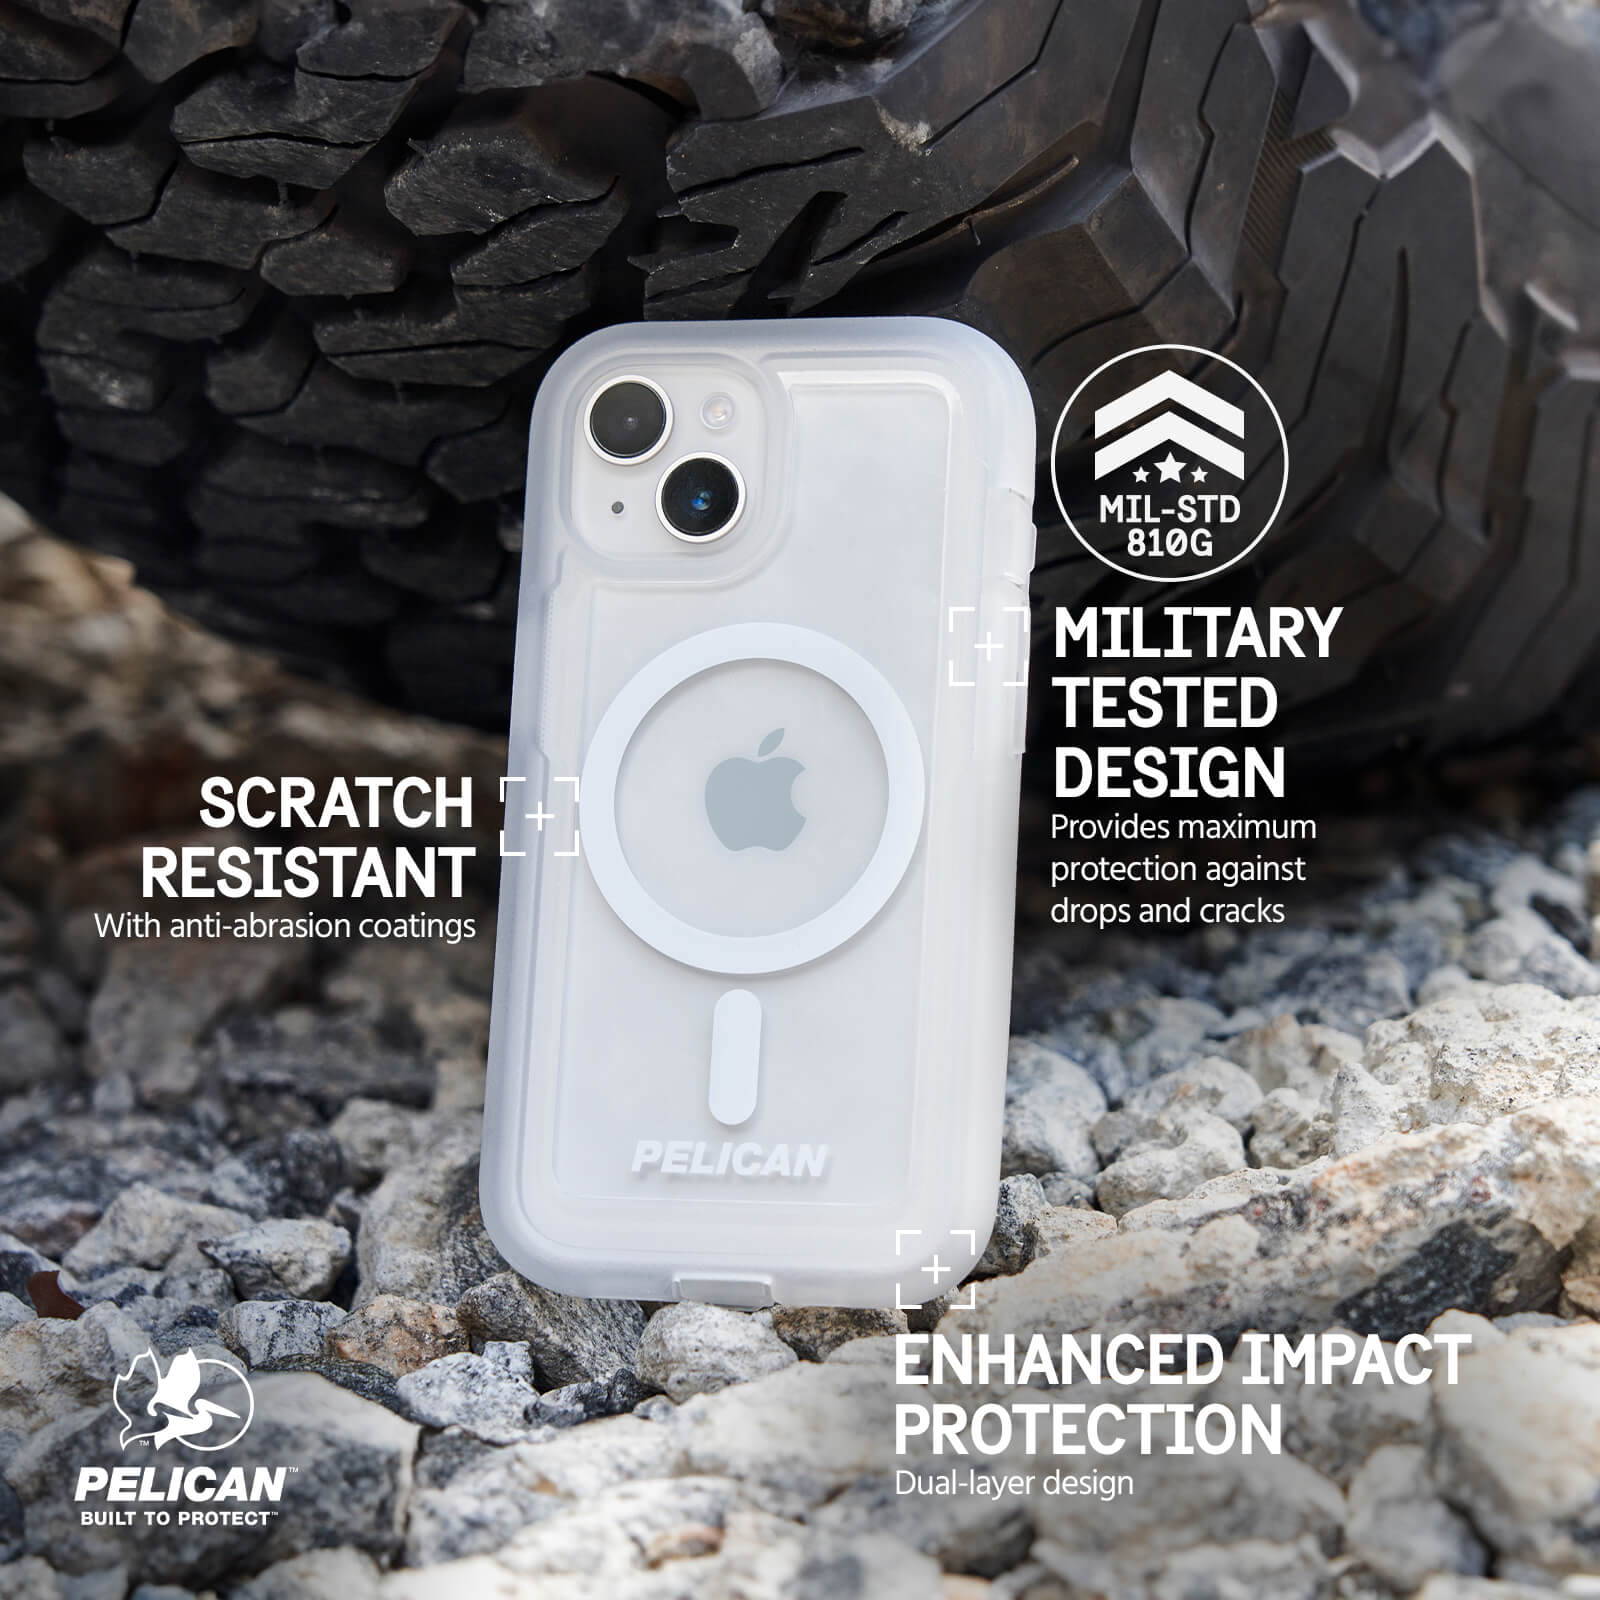 MILITARY TESTED DESIGN. PROVIDES MAXIMUM PROTECTION AGAINST DROP AND CRACKS. SCRATCH RESISTANT WITH ANTI-ABRASION COATINGS. ENHANCED IMPACT PROTECTION. DUAL-LAYER DESIGN.